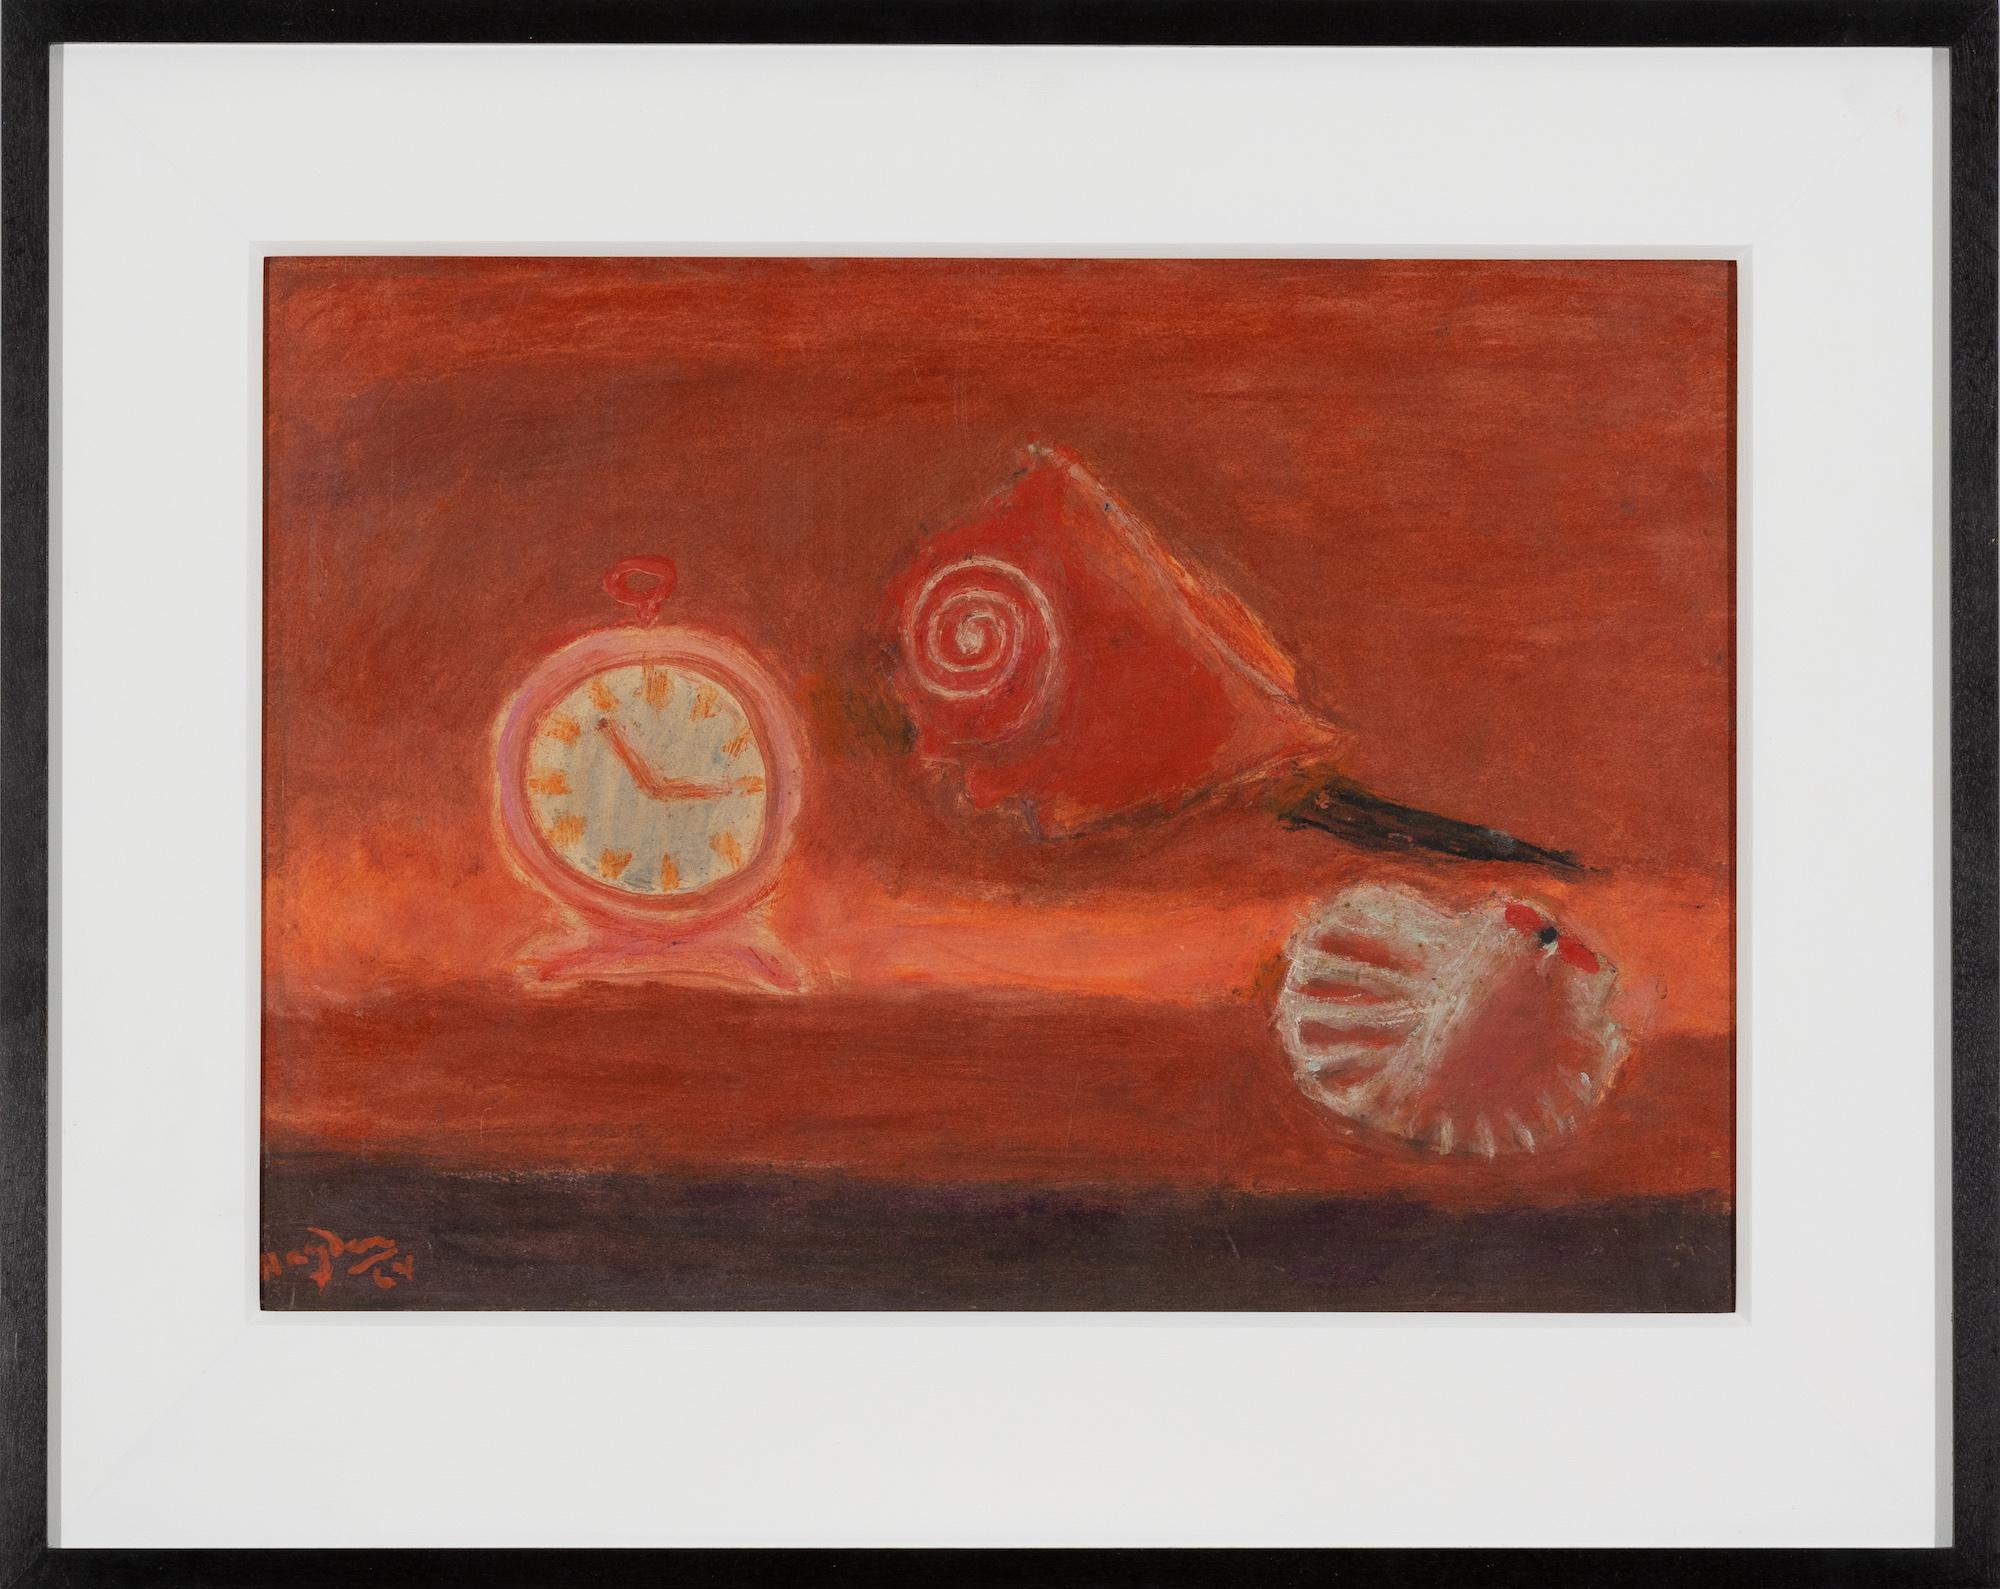 Coquillage et réveil en rouge by Henri Hayden (1883-1970)
Oil on paper laid down on isorel
33.5 x 46 cm (13 ¹/₄ x 18 ¹/₈ inches)
Signed and dated lower left, Hayden 64

This work is accompanied by a certificate of authenticity from Laurence Le